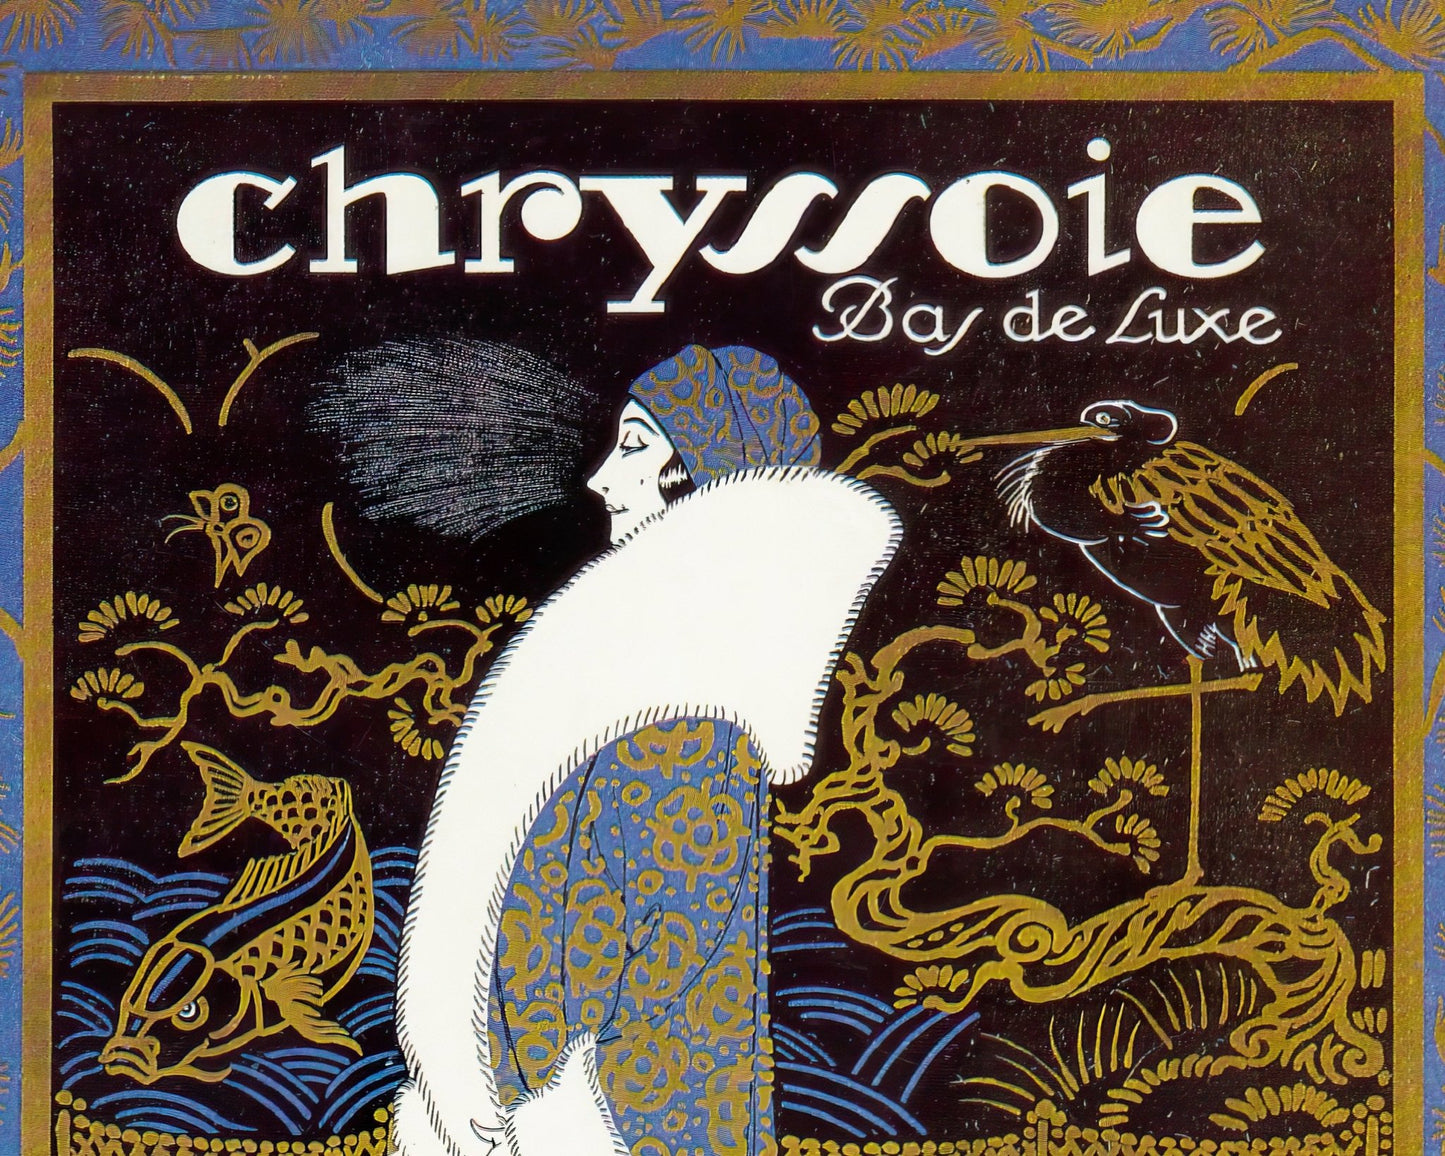 Vintage Advertisment "Chryssoie Bas Deluxe" (c.1926) - Mabon Gallery